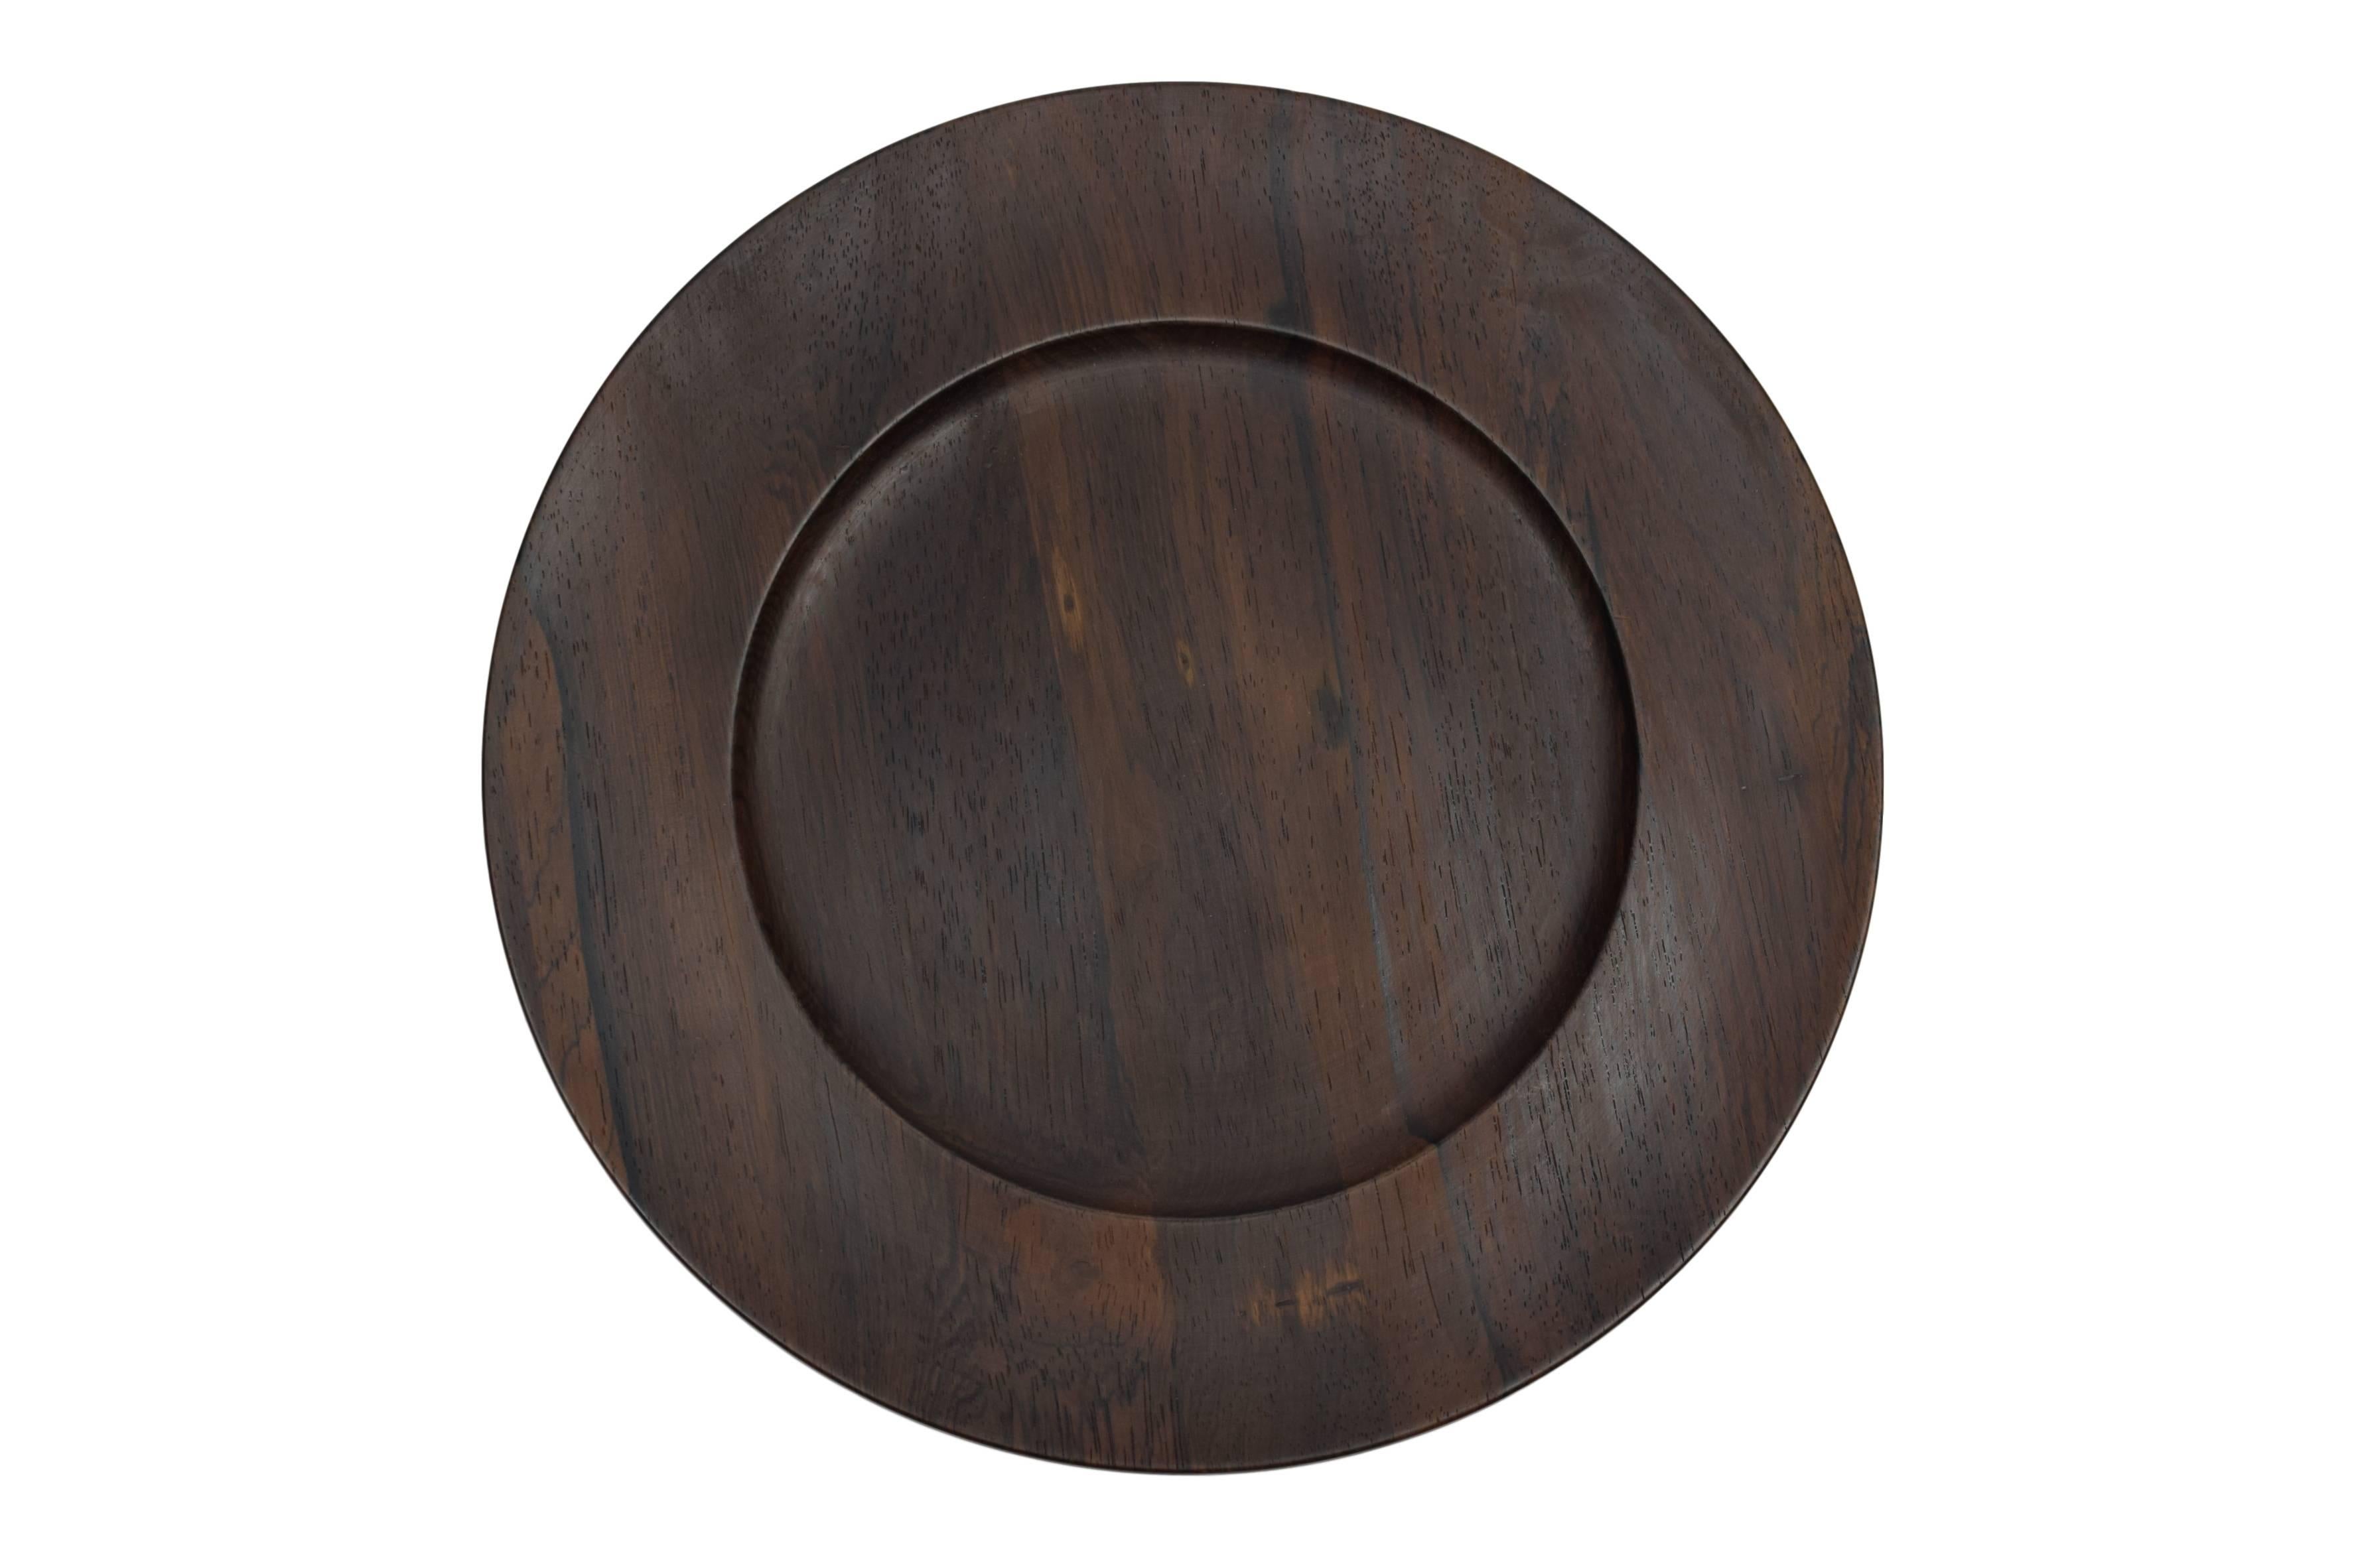 Wenge Danish Midcentury, Jens H. Quistgaard, Three Cover Plates, Rosewood, Kronjyden For Sale